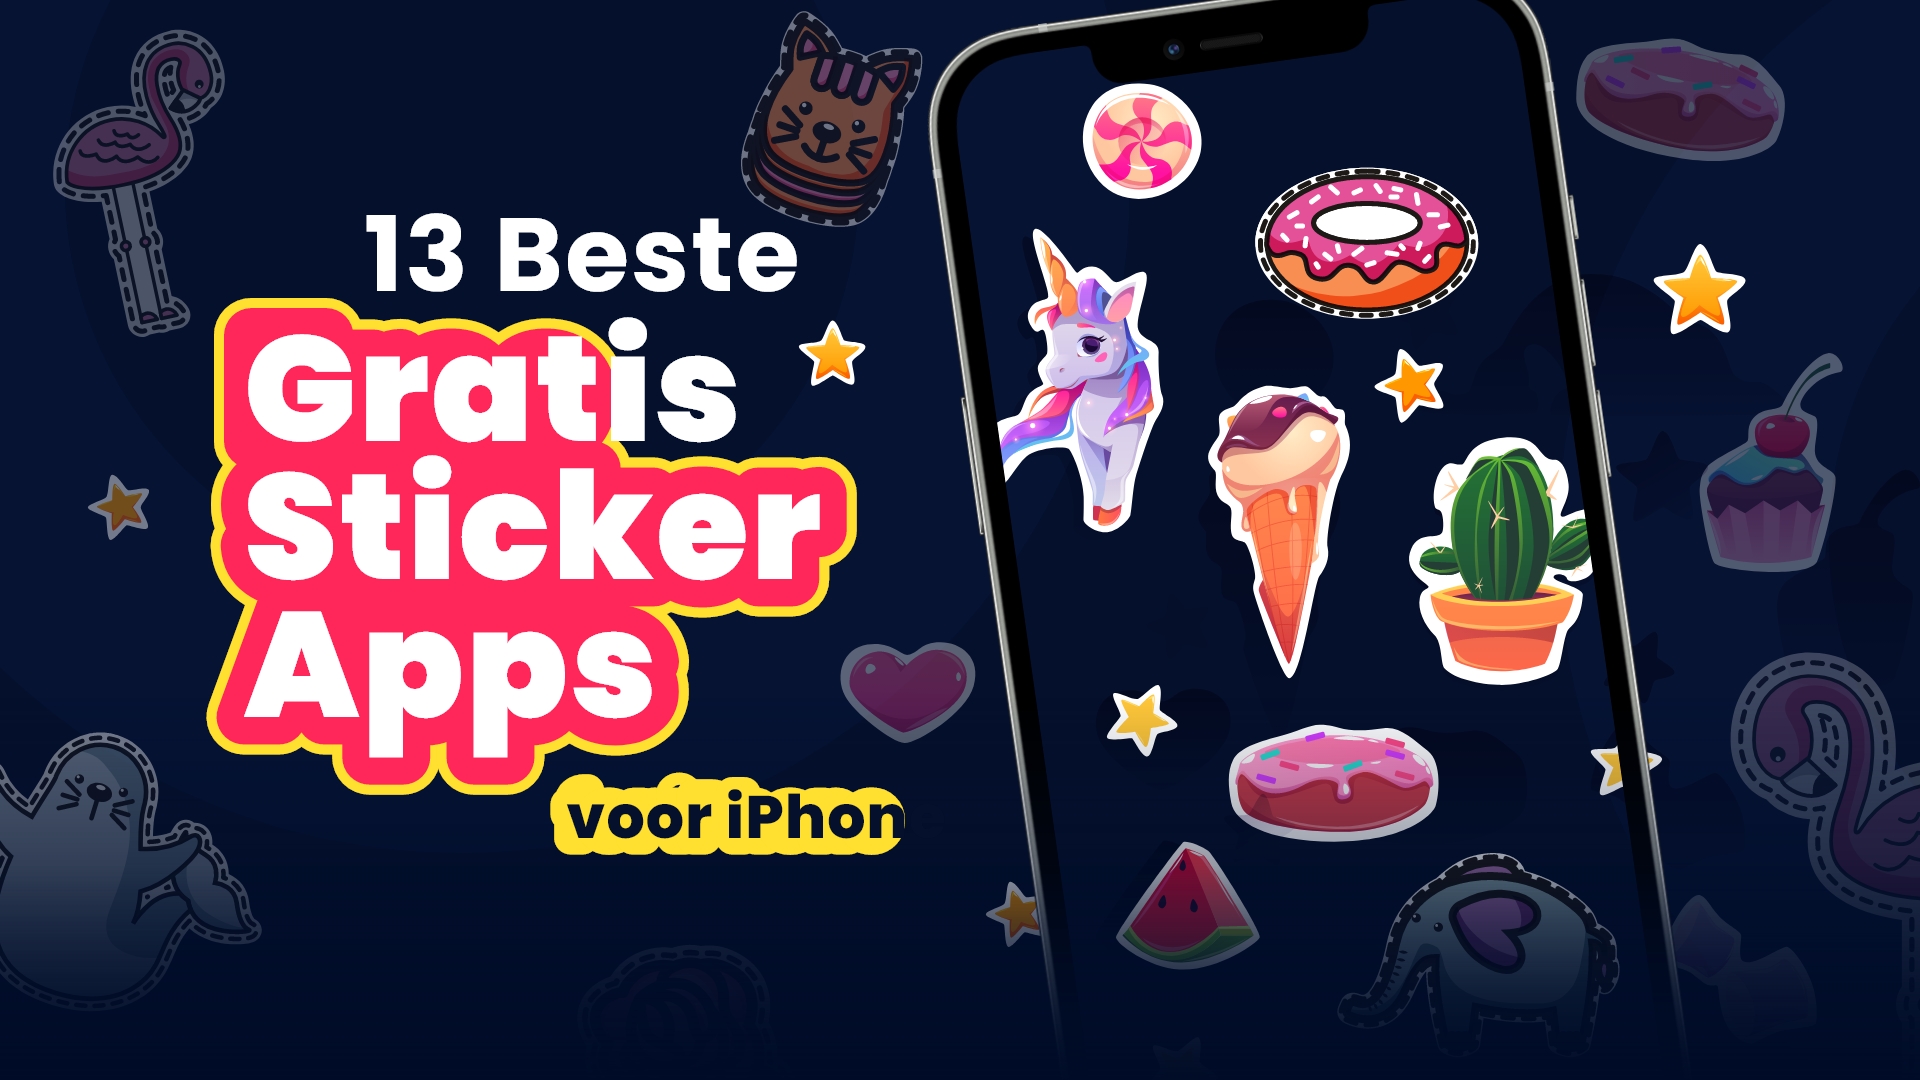 Sticker Apps for iPhone